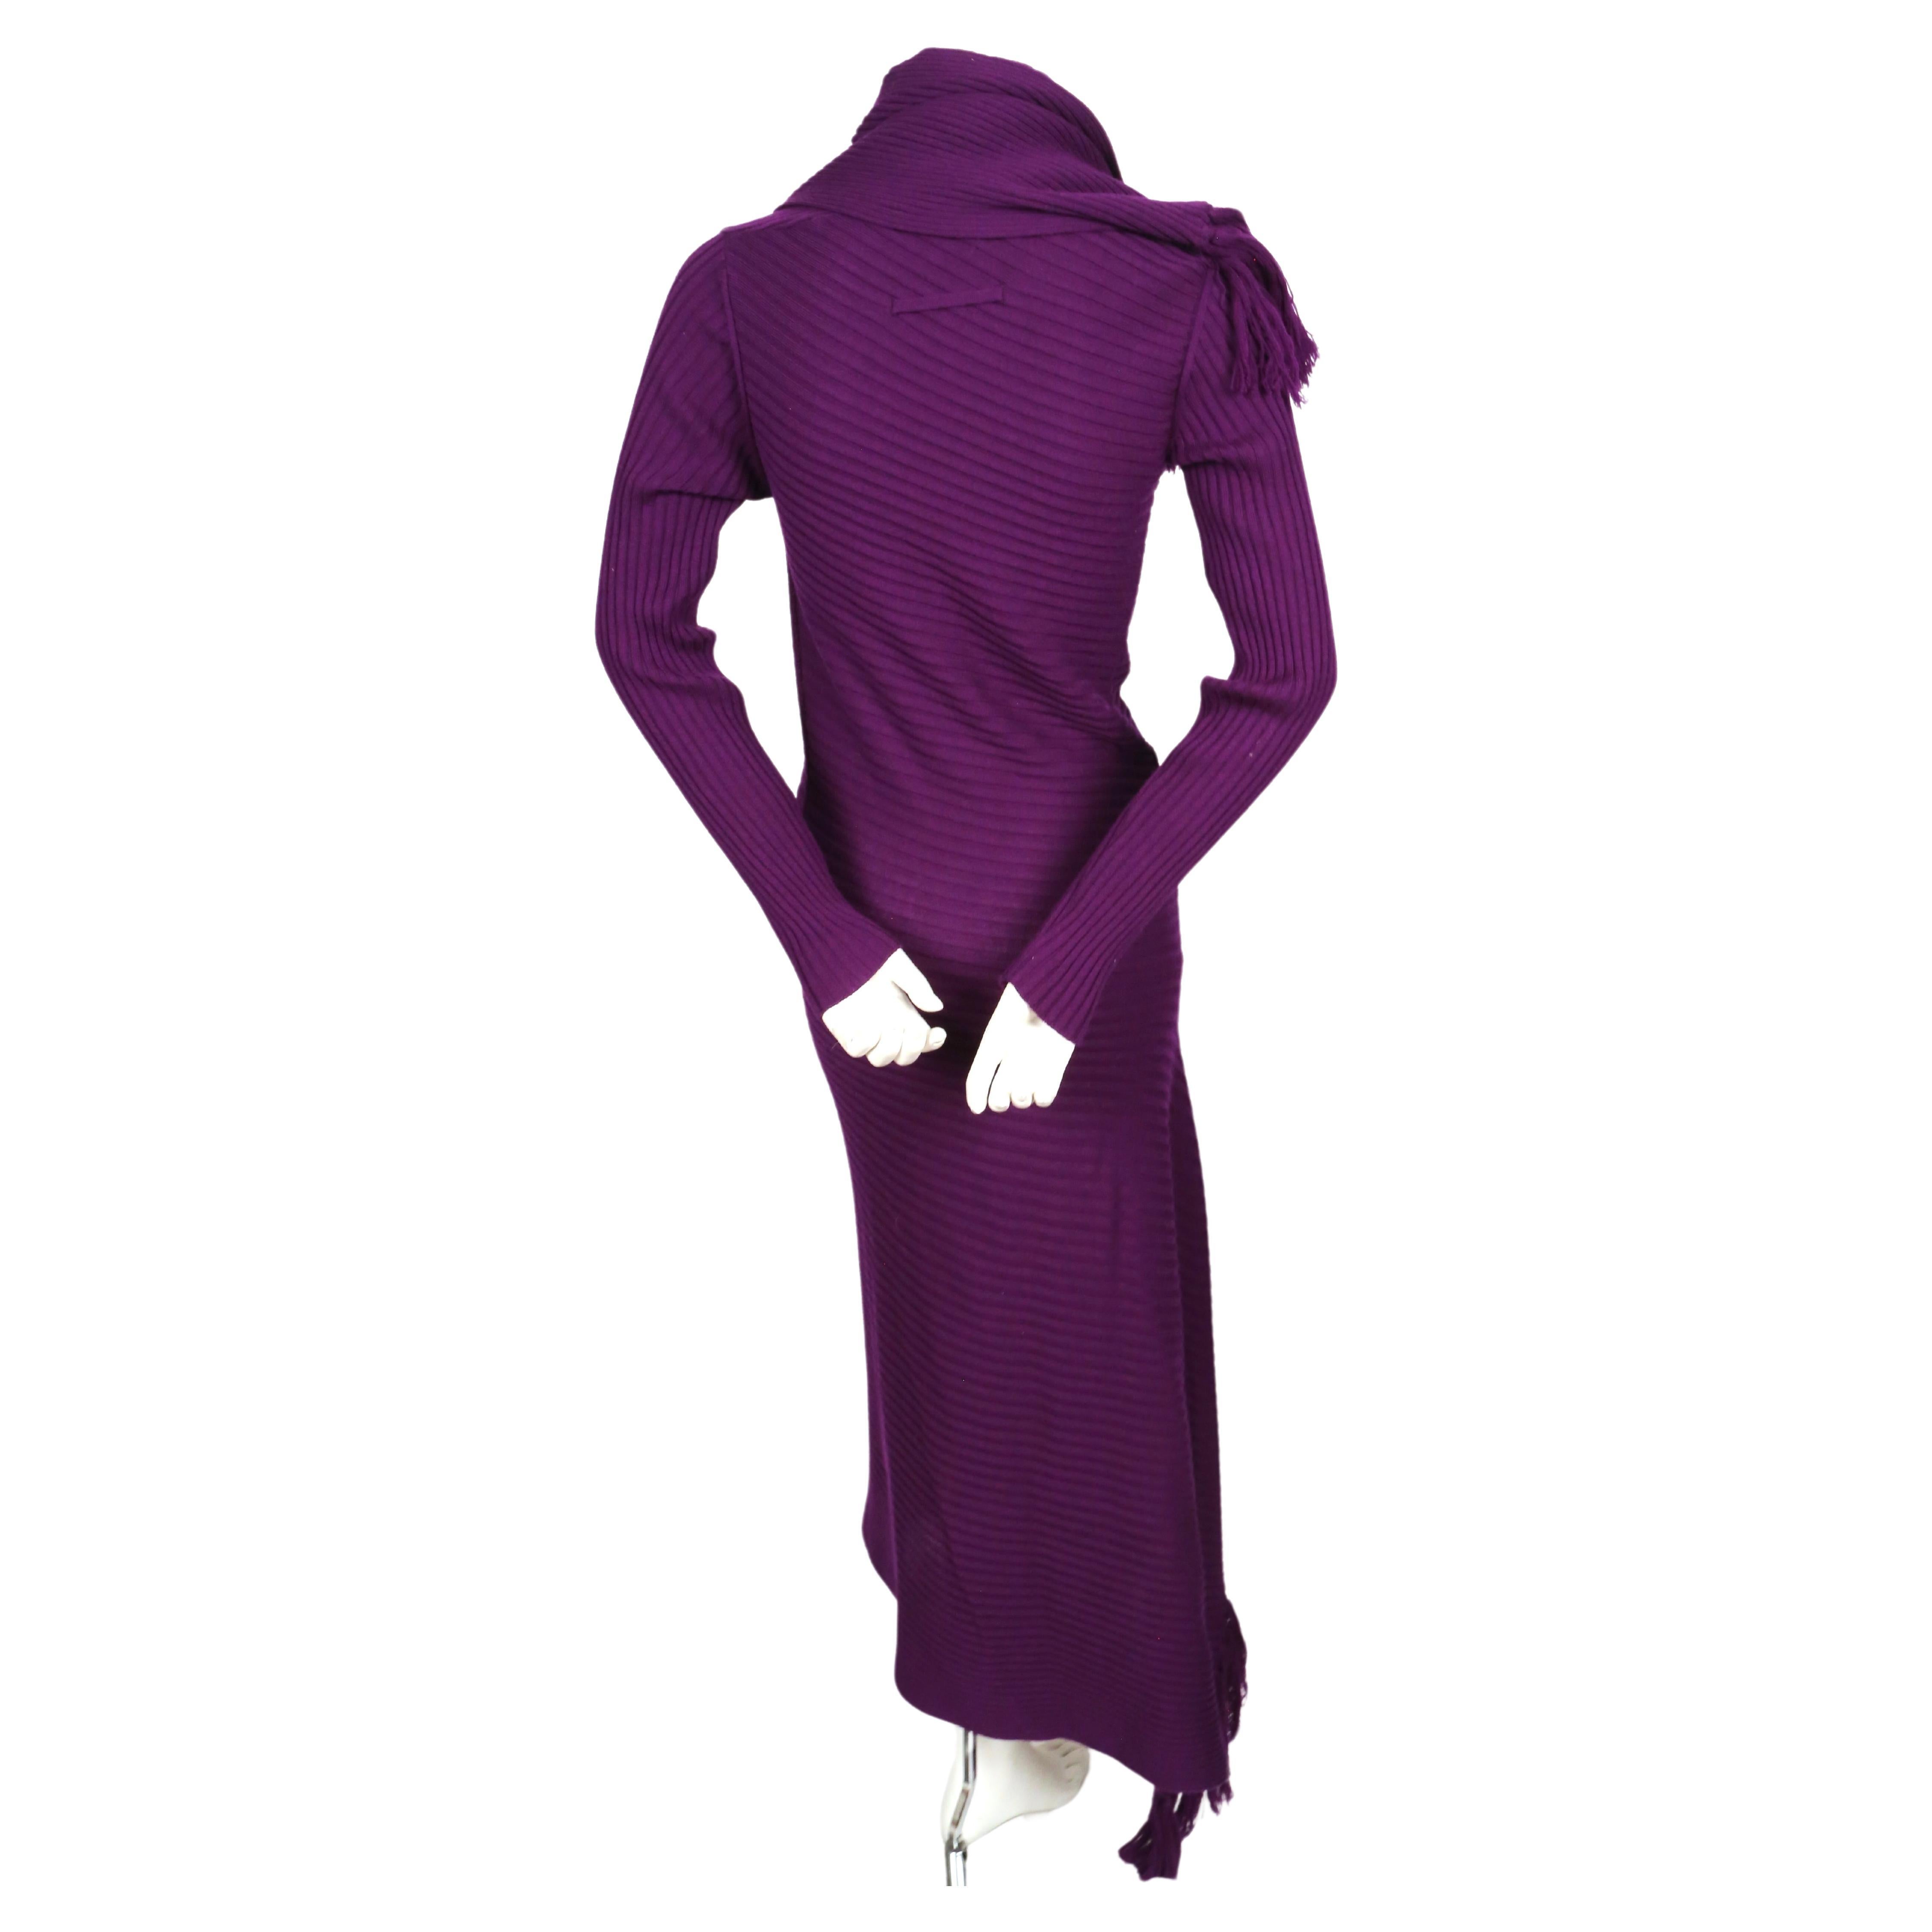  JEAN PAUL GAULTIER purple ribbed knit dress with scarf For Sale 2